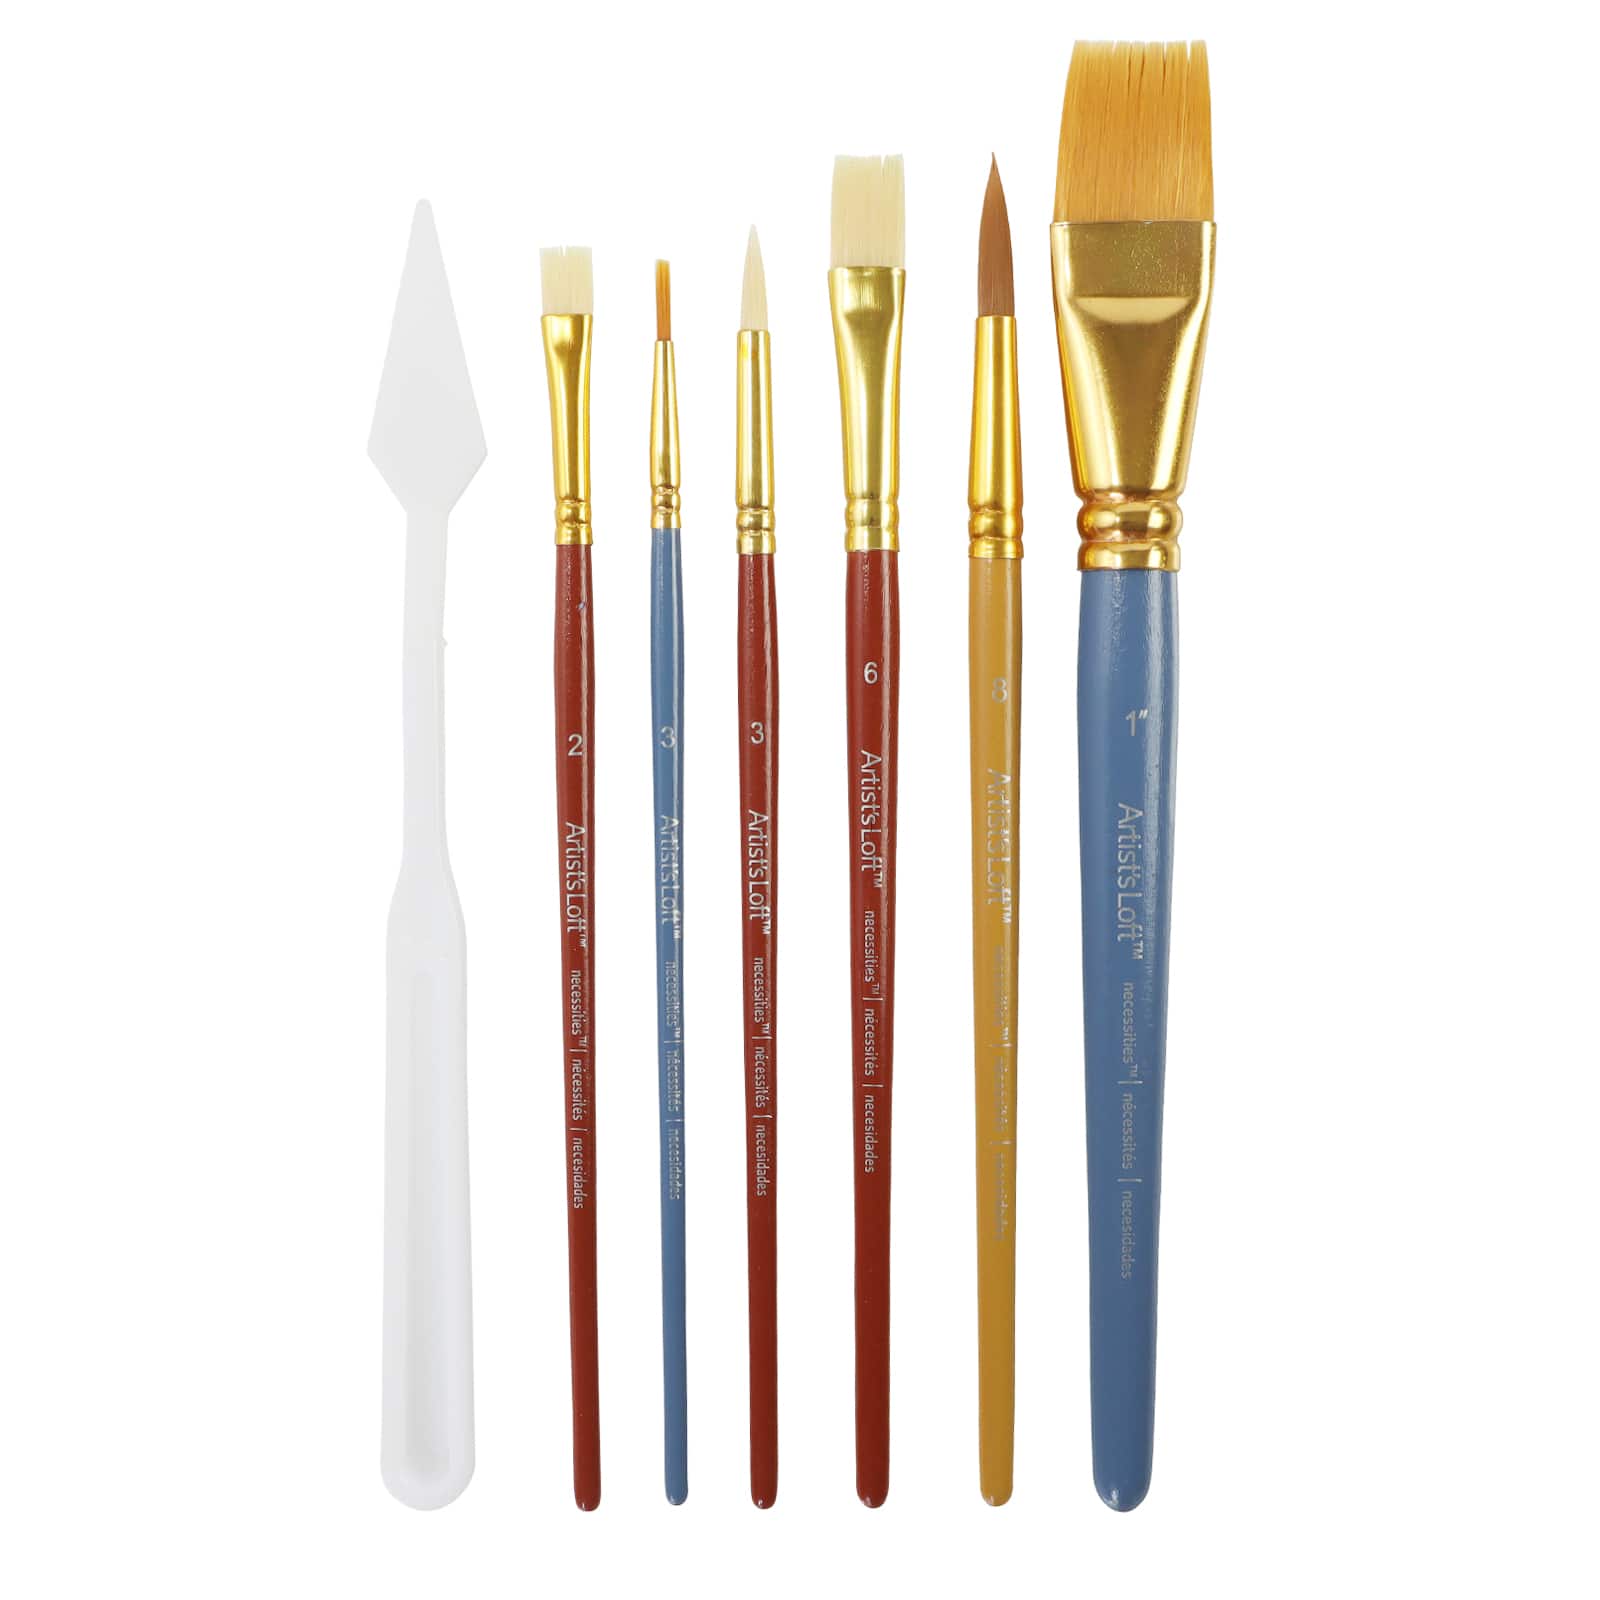 Mixed Media Paintbrushes 25-Count